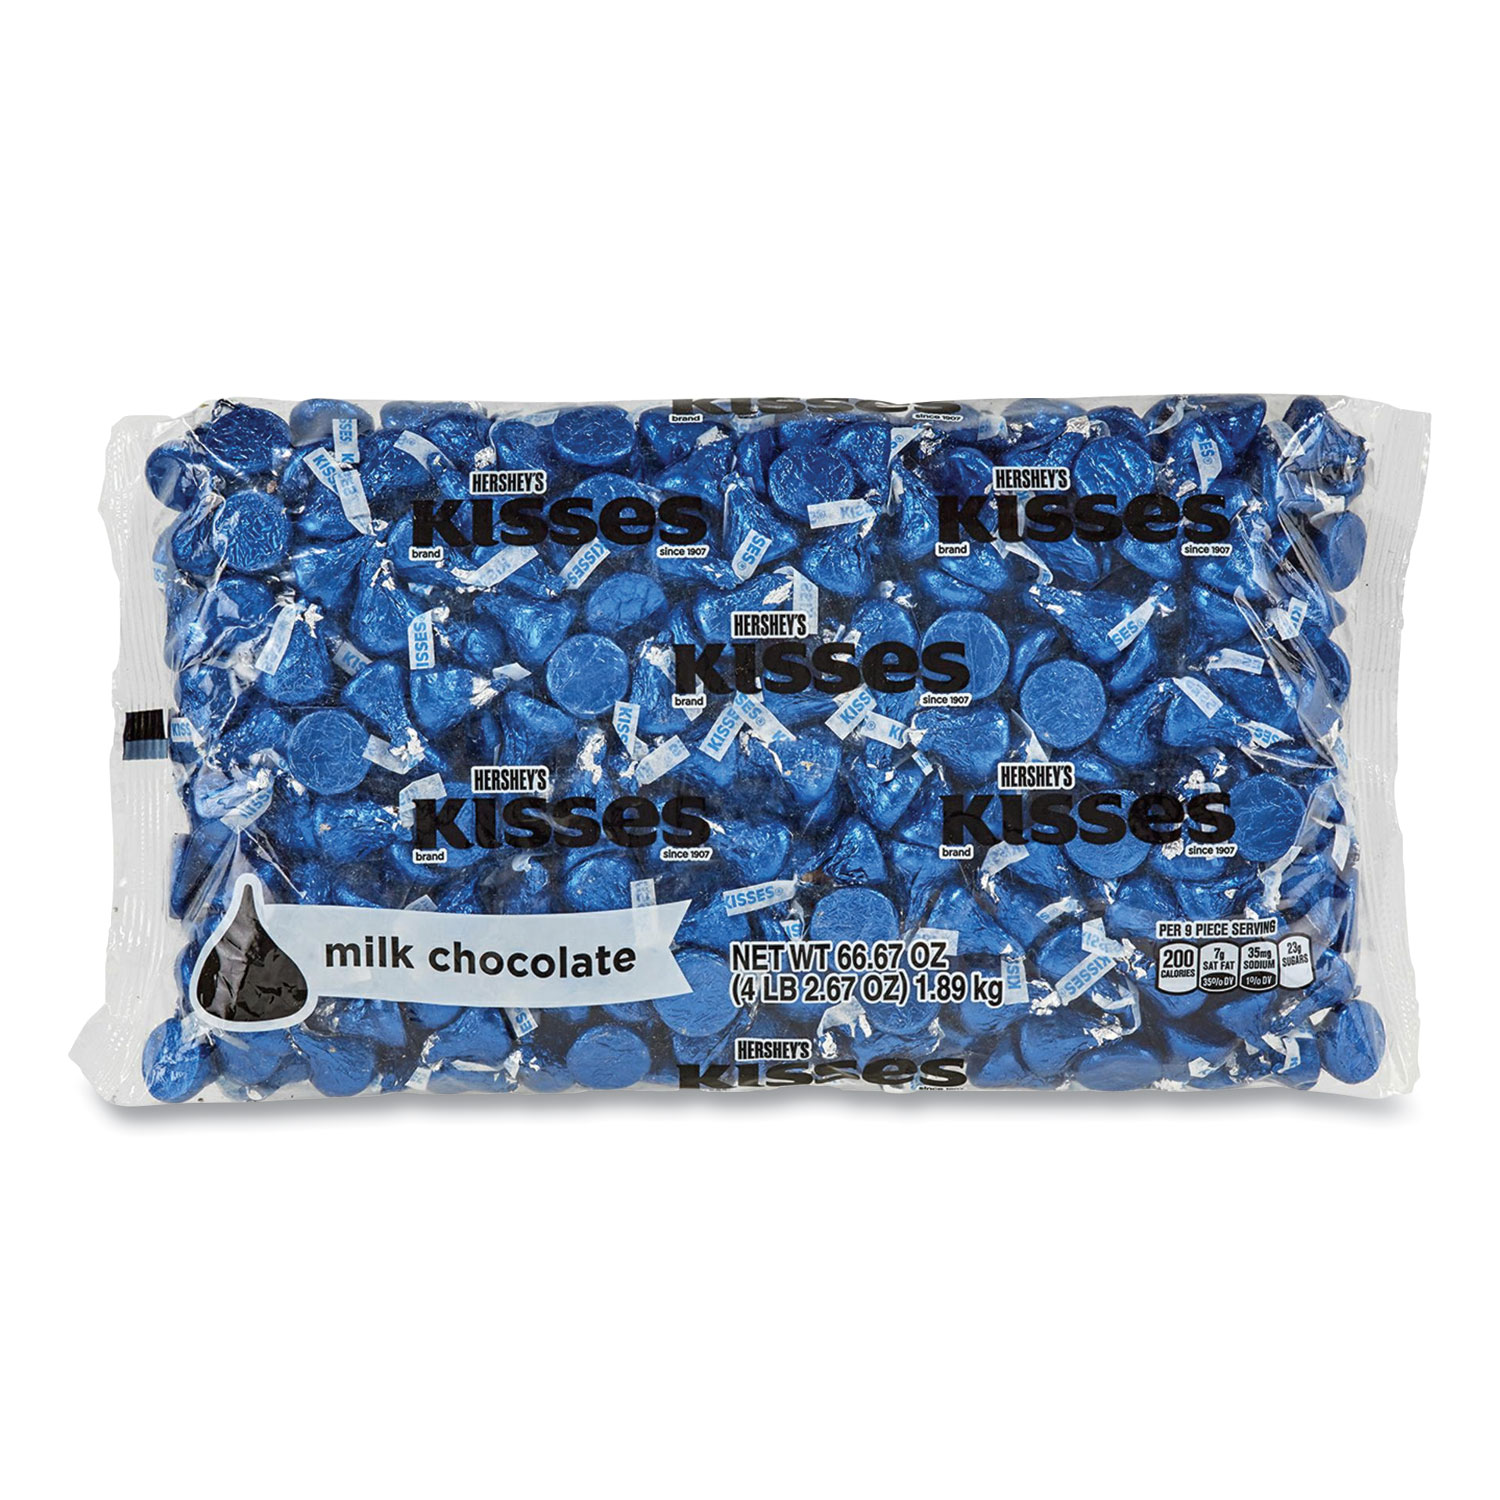 Hershey®s KISSES, Milk Chocolate, Dark Blue Wrappers, 66.7 oz Bag, Free Delivery in 1-4 Business Days